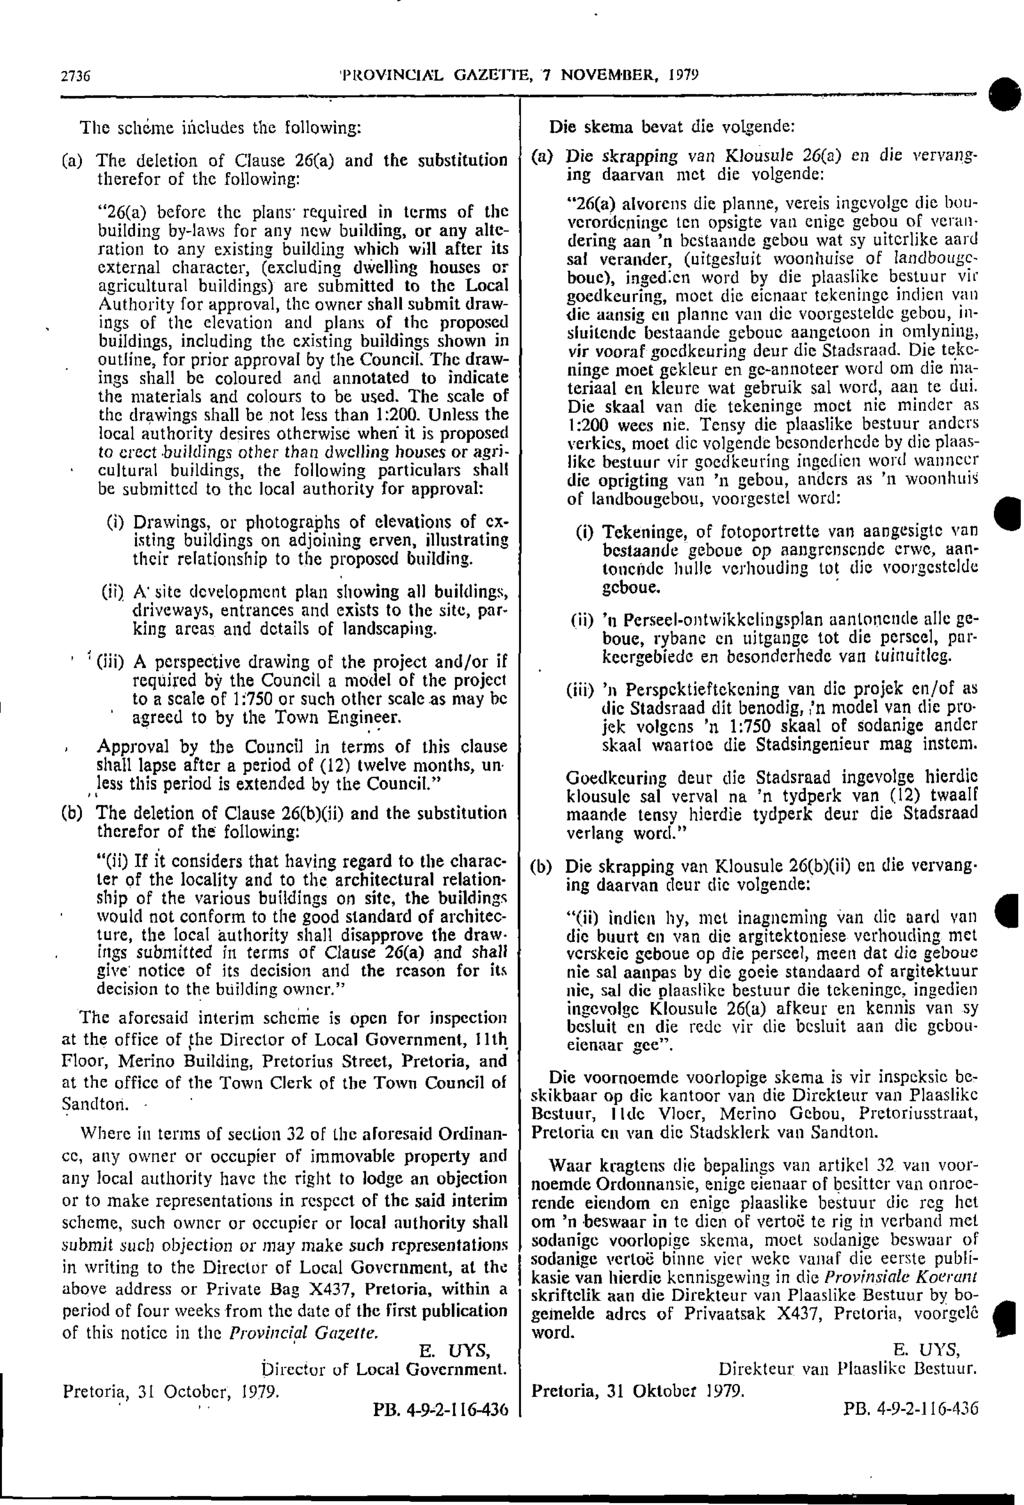 2736 PROVNCAL GAZETTE 7 NOVEMBER 1979 1 The scheme includes the following: Die skema bevat die volgende: (a) The deletion of Clause 26(a) and the substitution (a) Die skrapping van Klousule 26(a) en